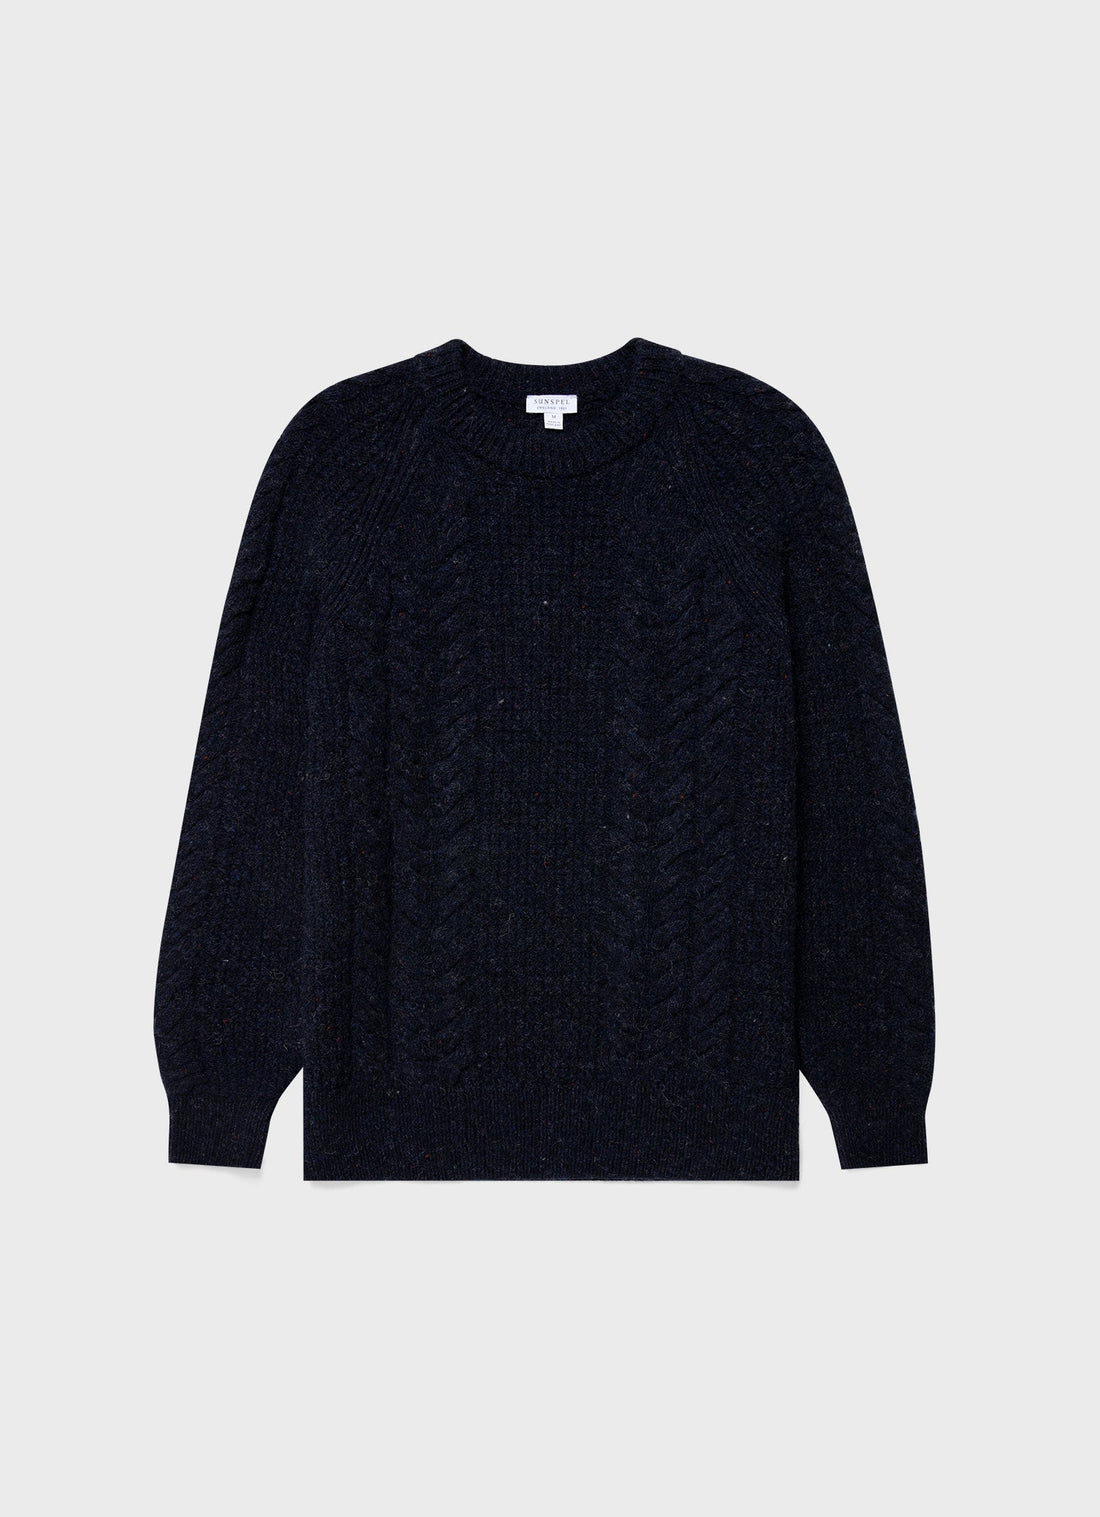 Men's Textured Donegal Jumper in Navy Donegal